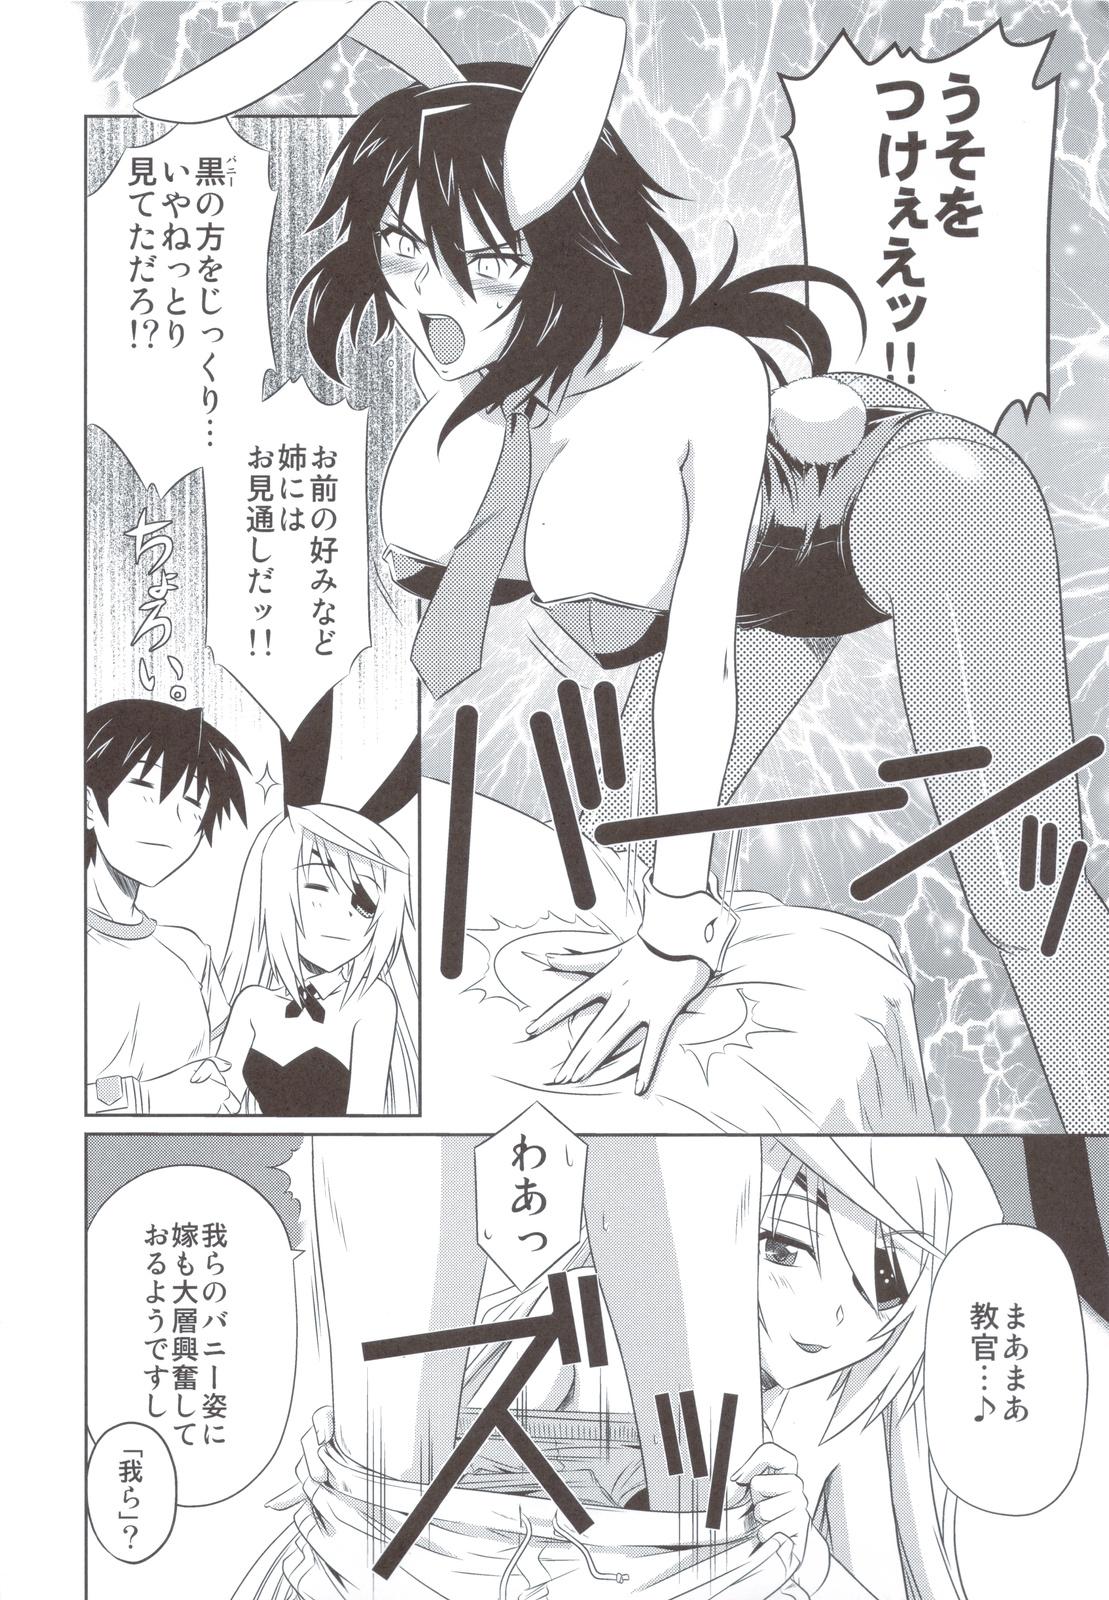 Fake is Incest Strategy 3 - Infinite stratos Amateurs - Page 5